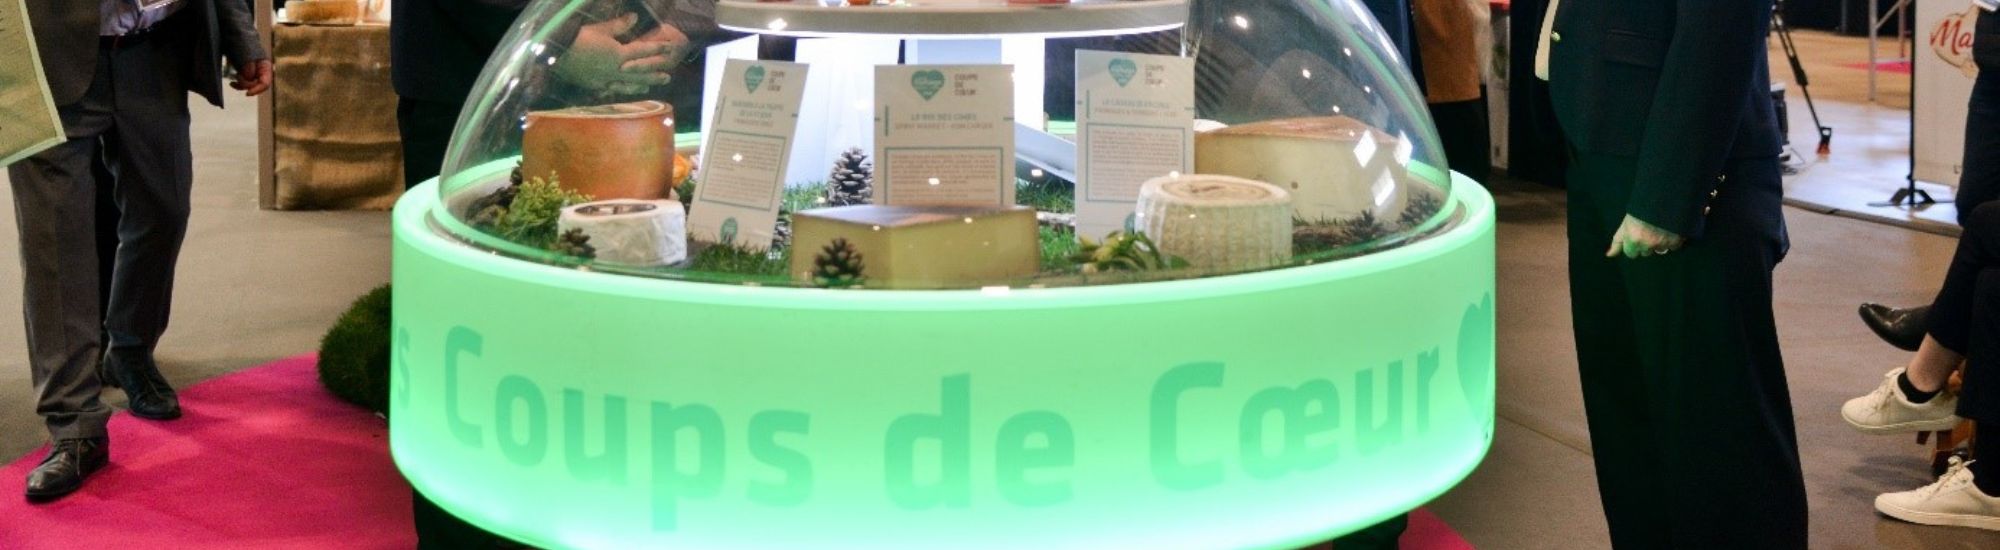 Exhibition of "Coup de Coeur" competitions under a refrigerated cloche. 